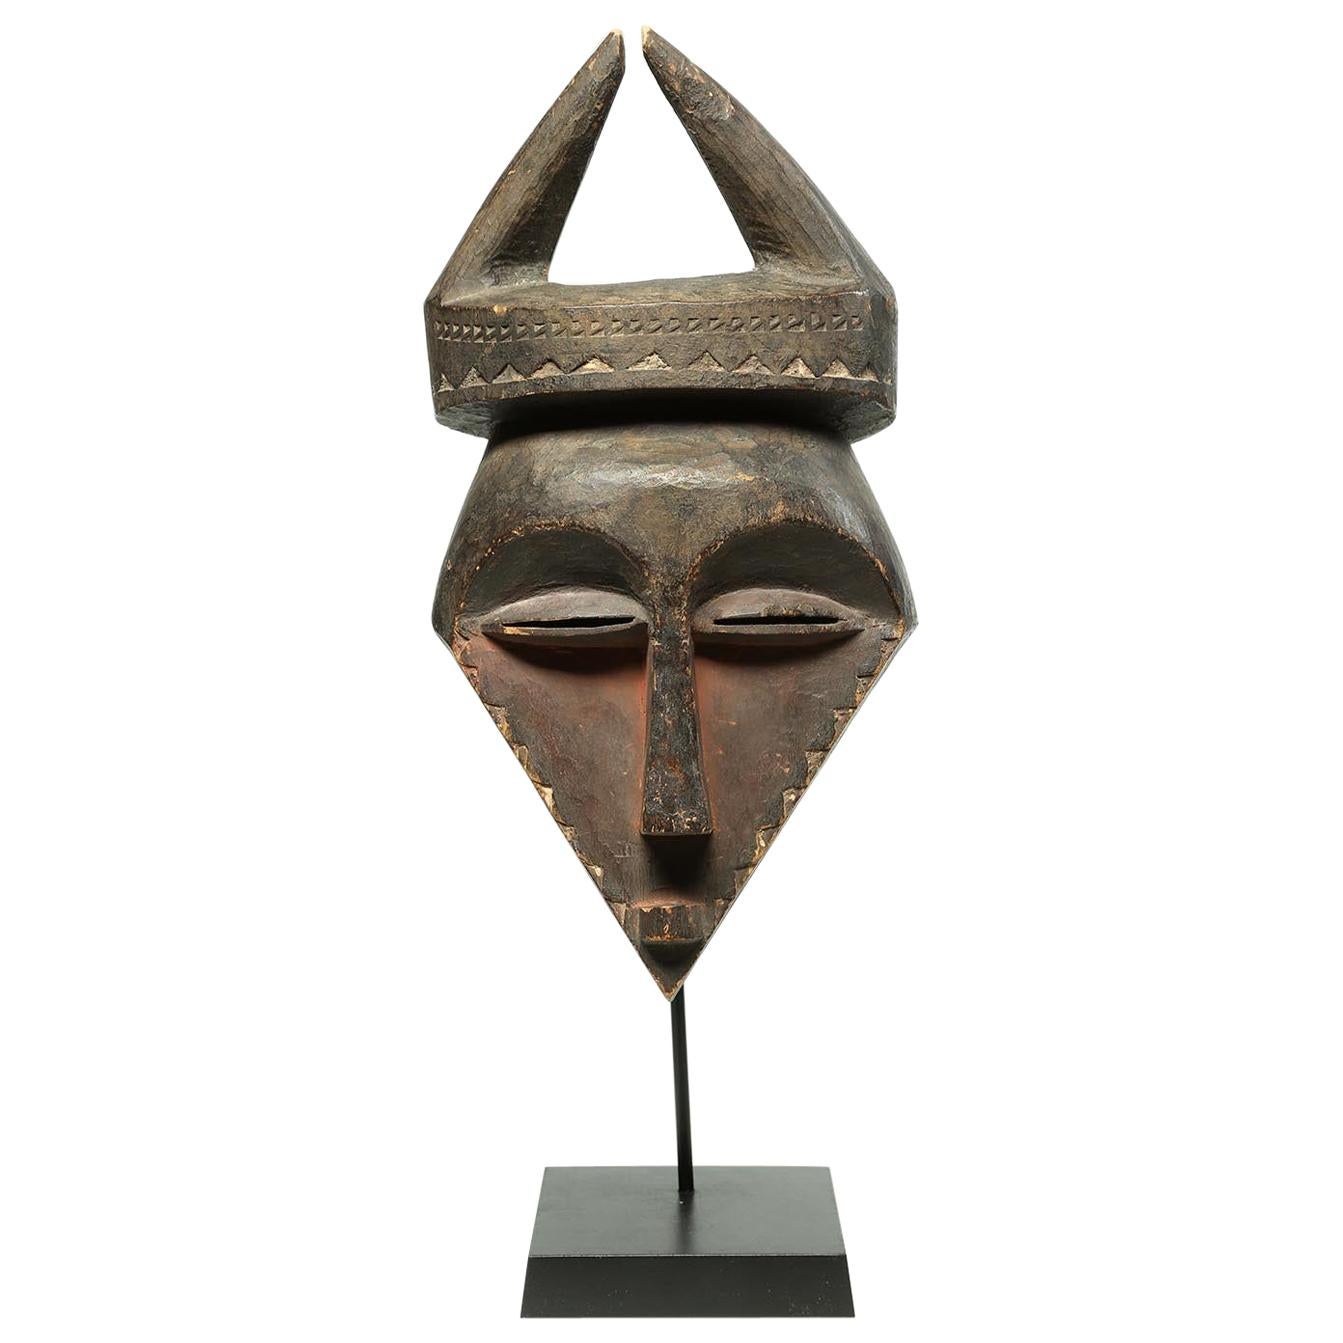 Eastern Pende Geometric Tribal Mask with Horns Ex Museum Congo, Africa